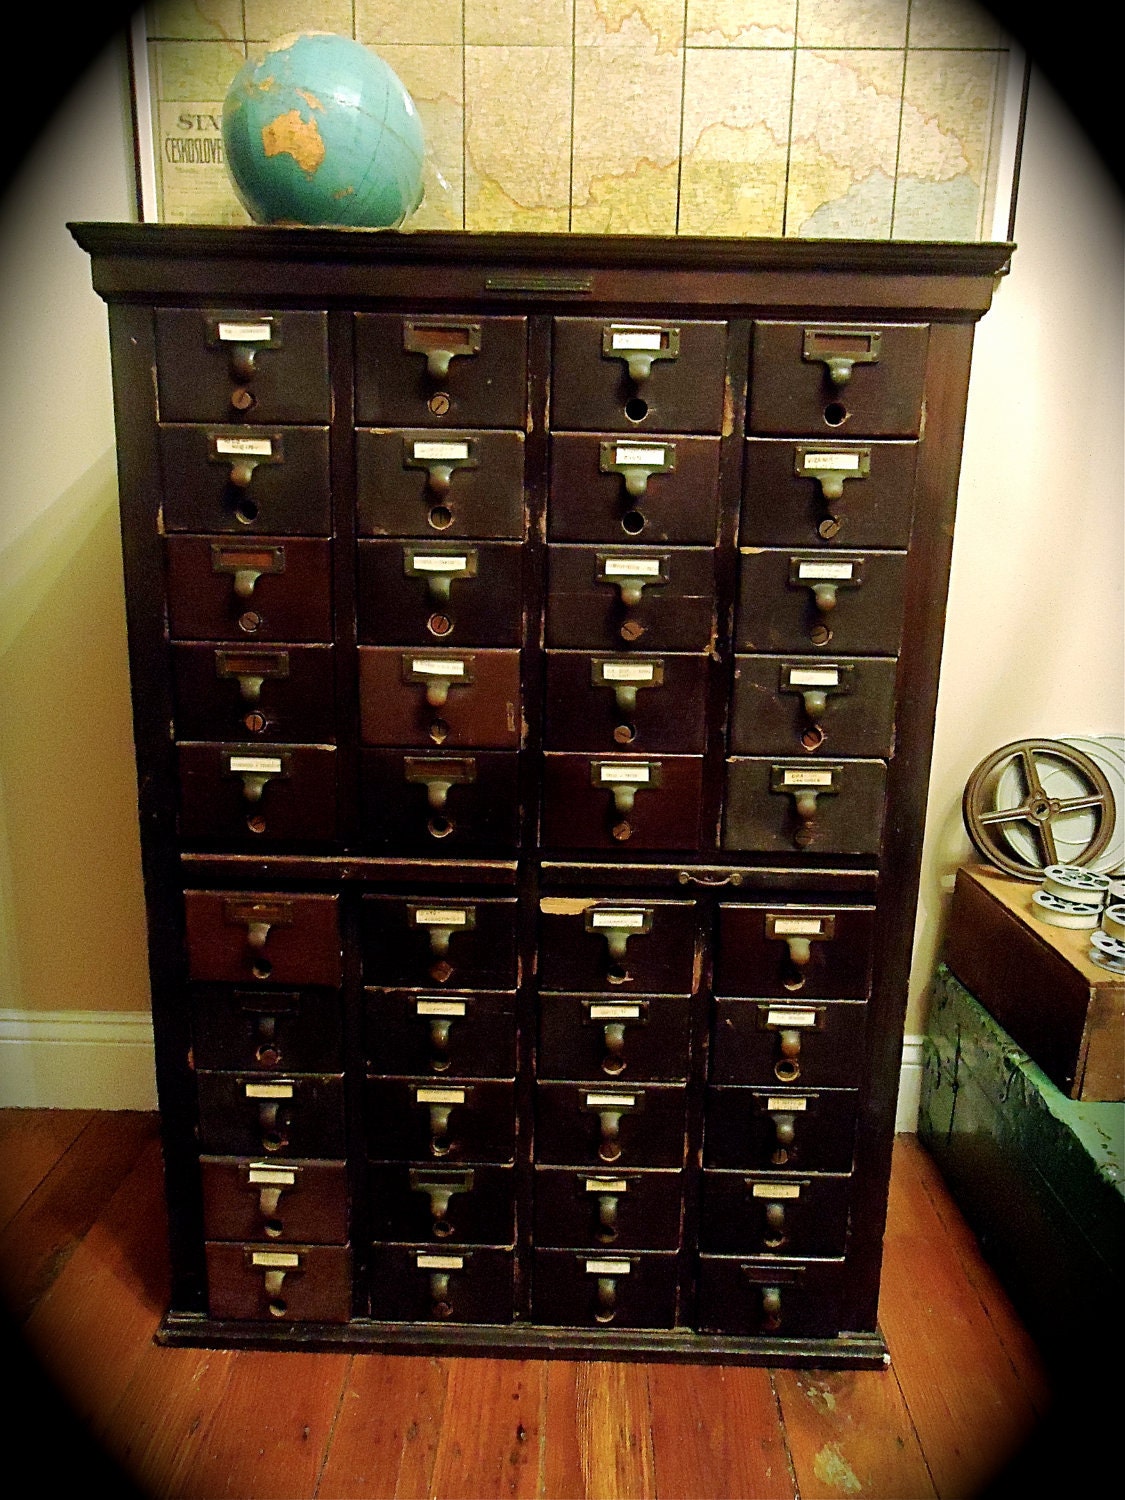 LIBRARY CARD CATALOG FURNITURE - FURNITURE - COMPARE PRICES